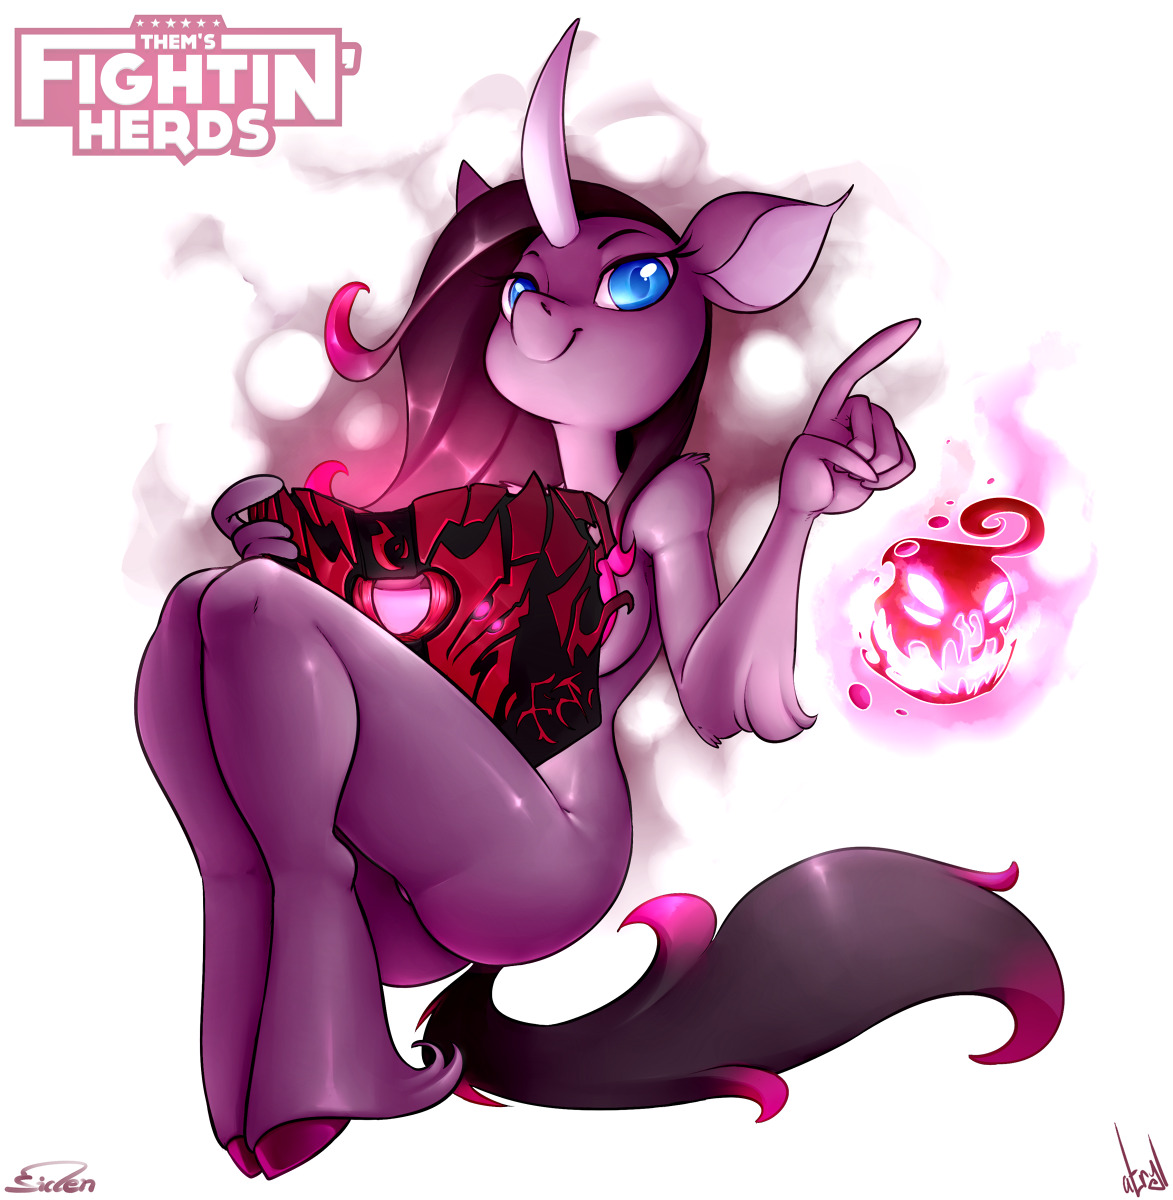 Oleander - Them’s Fightin’ HerdsThe daily TFH collab update we did with the wonderfully